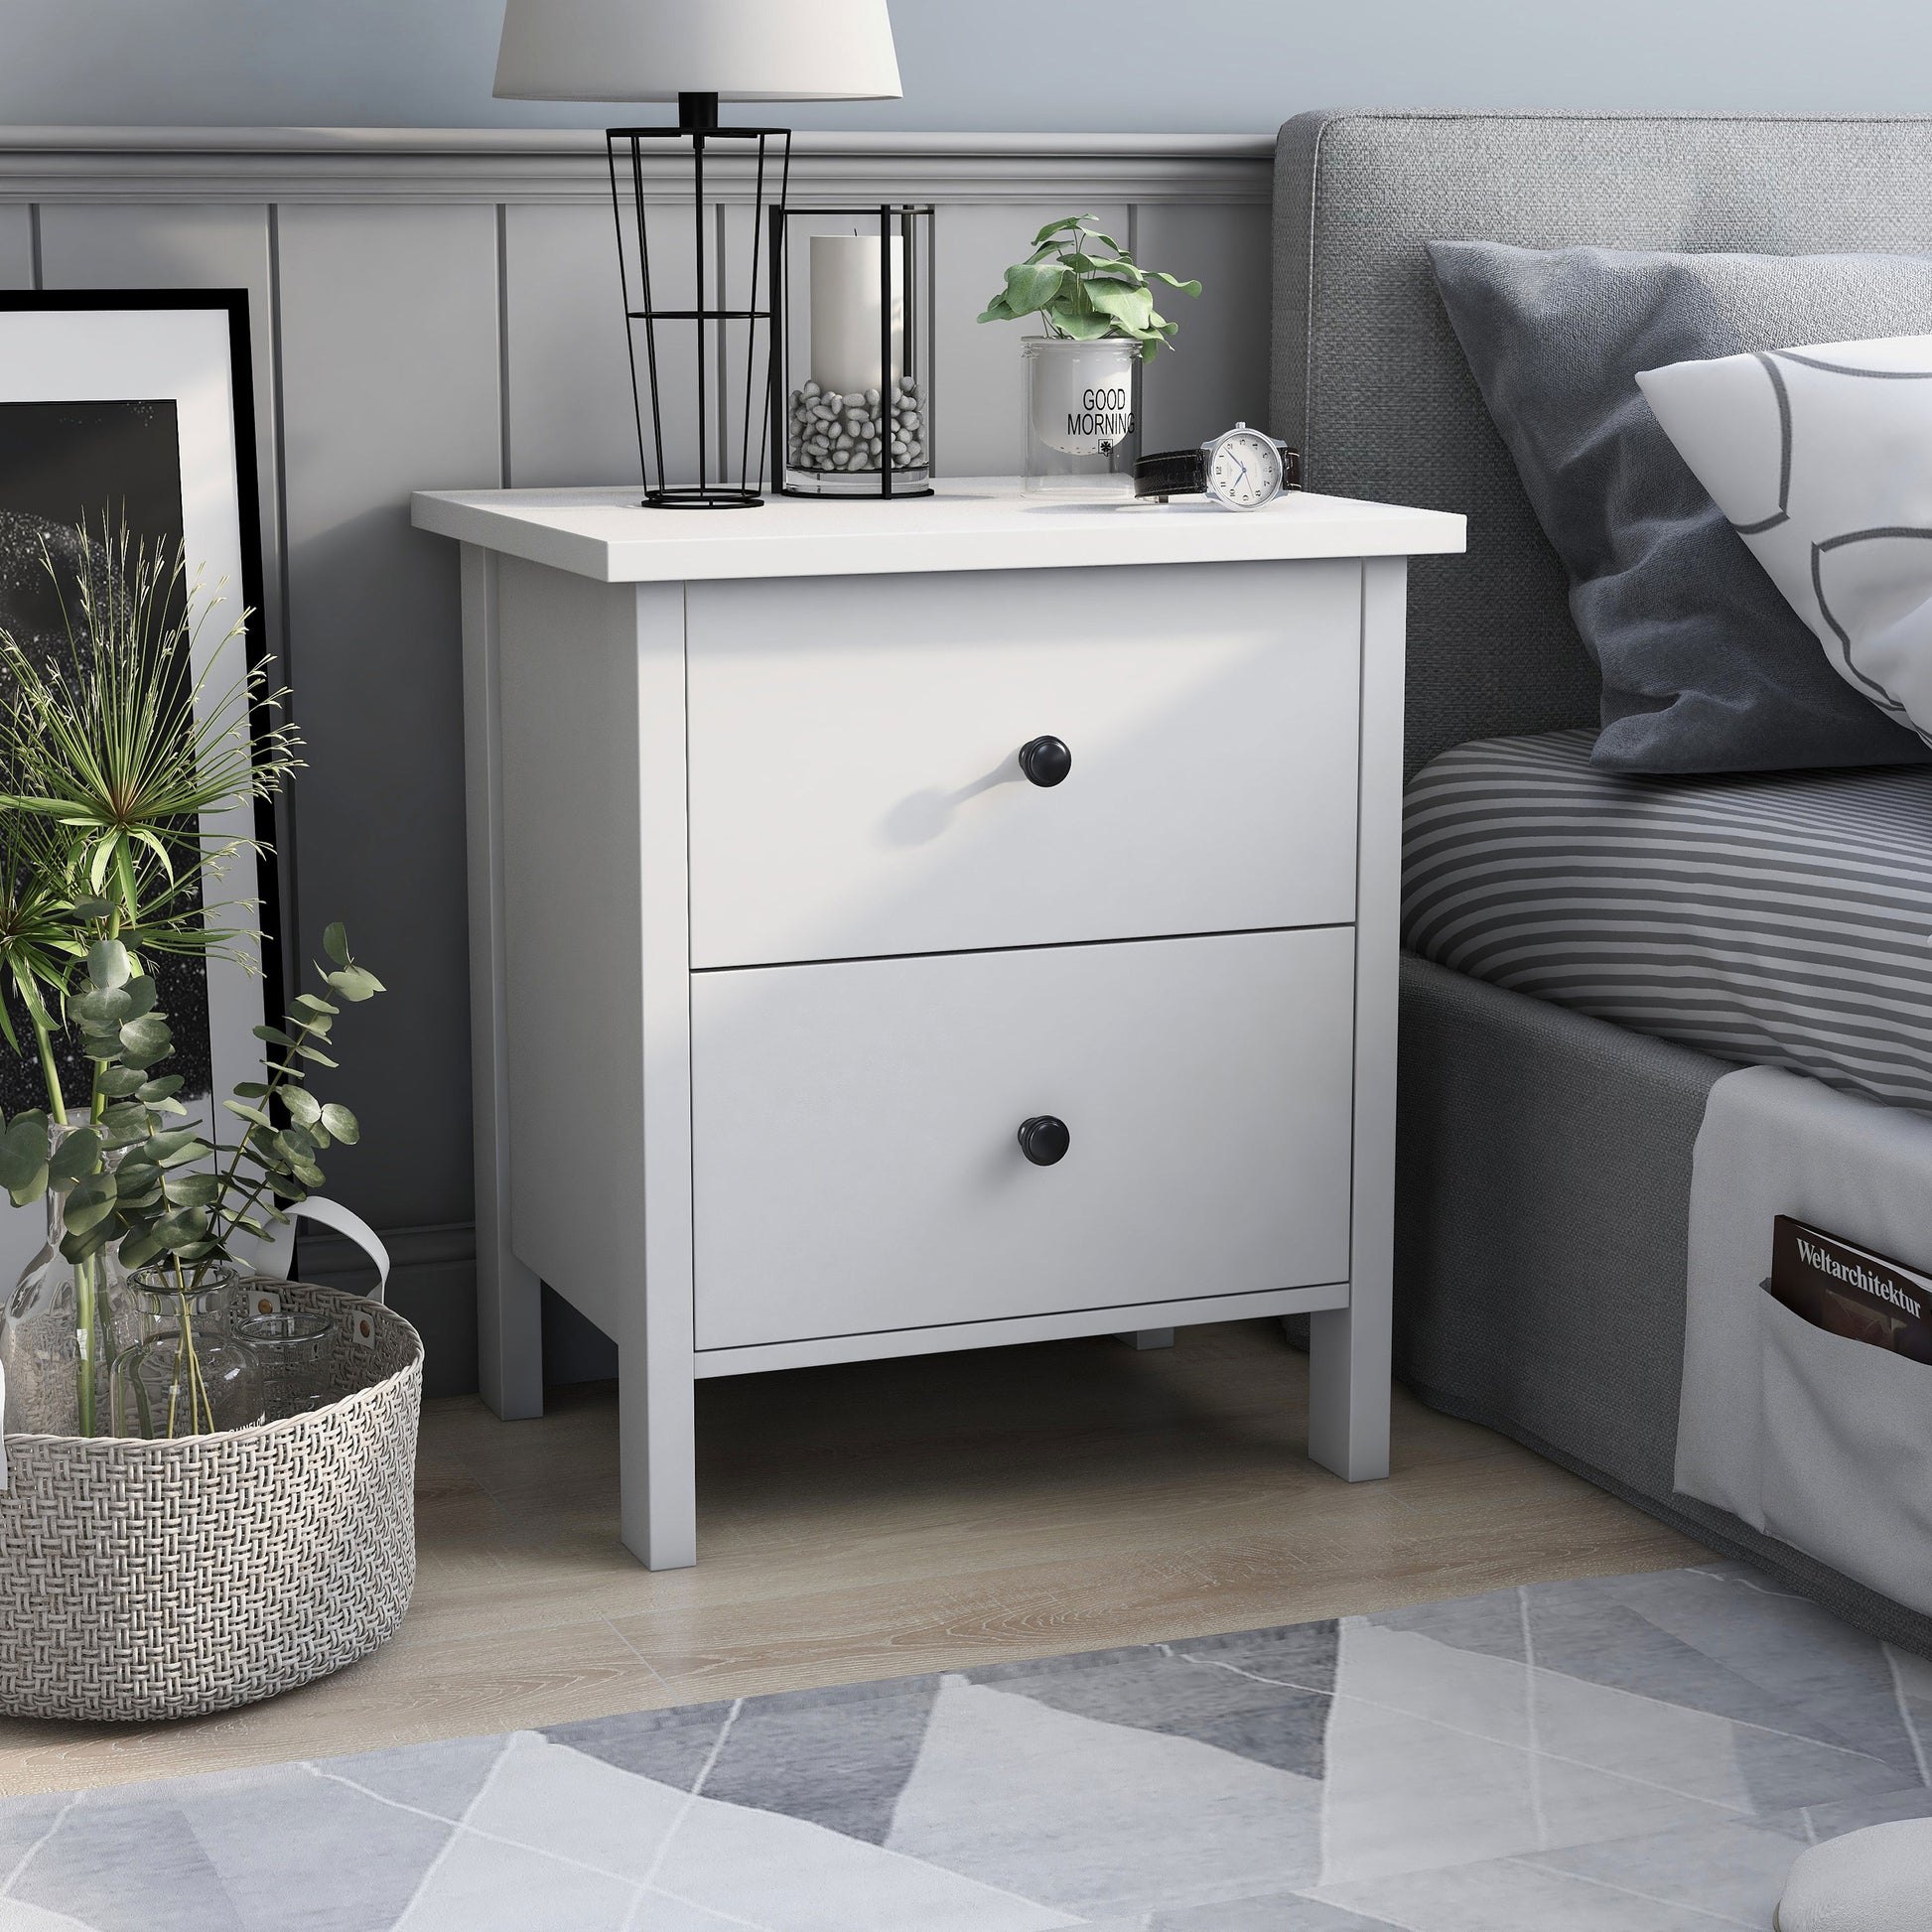 Right angled transitional white two-drawer nightstand in a bedroom with accessories